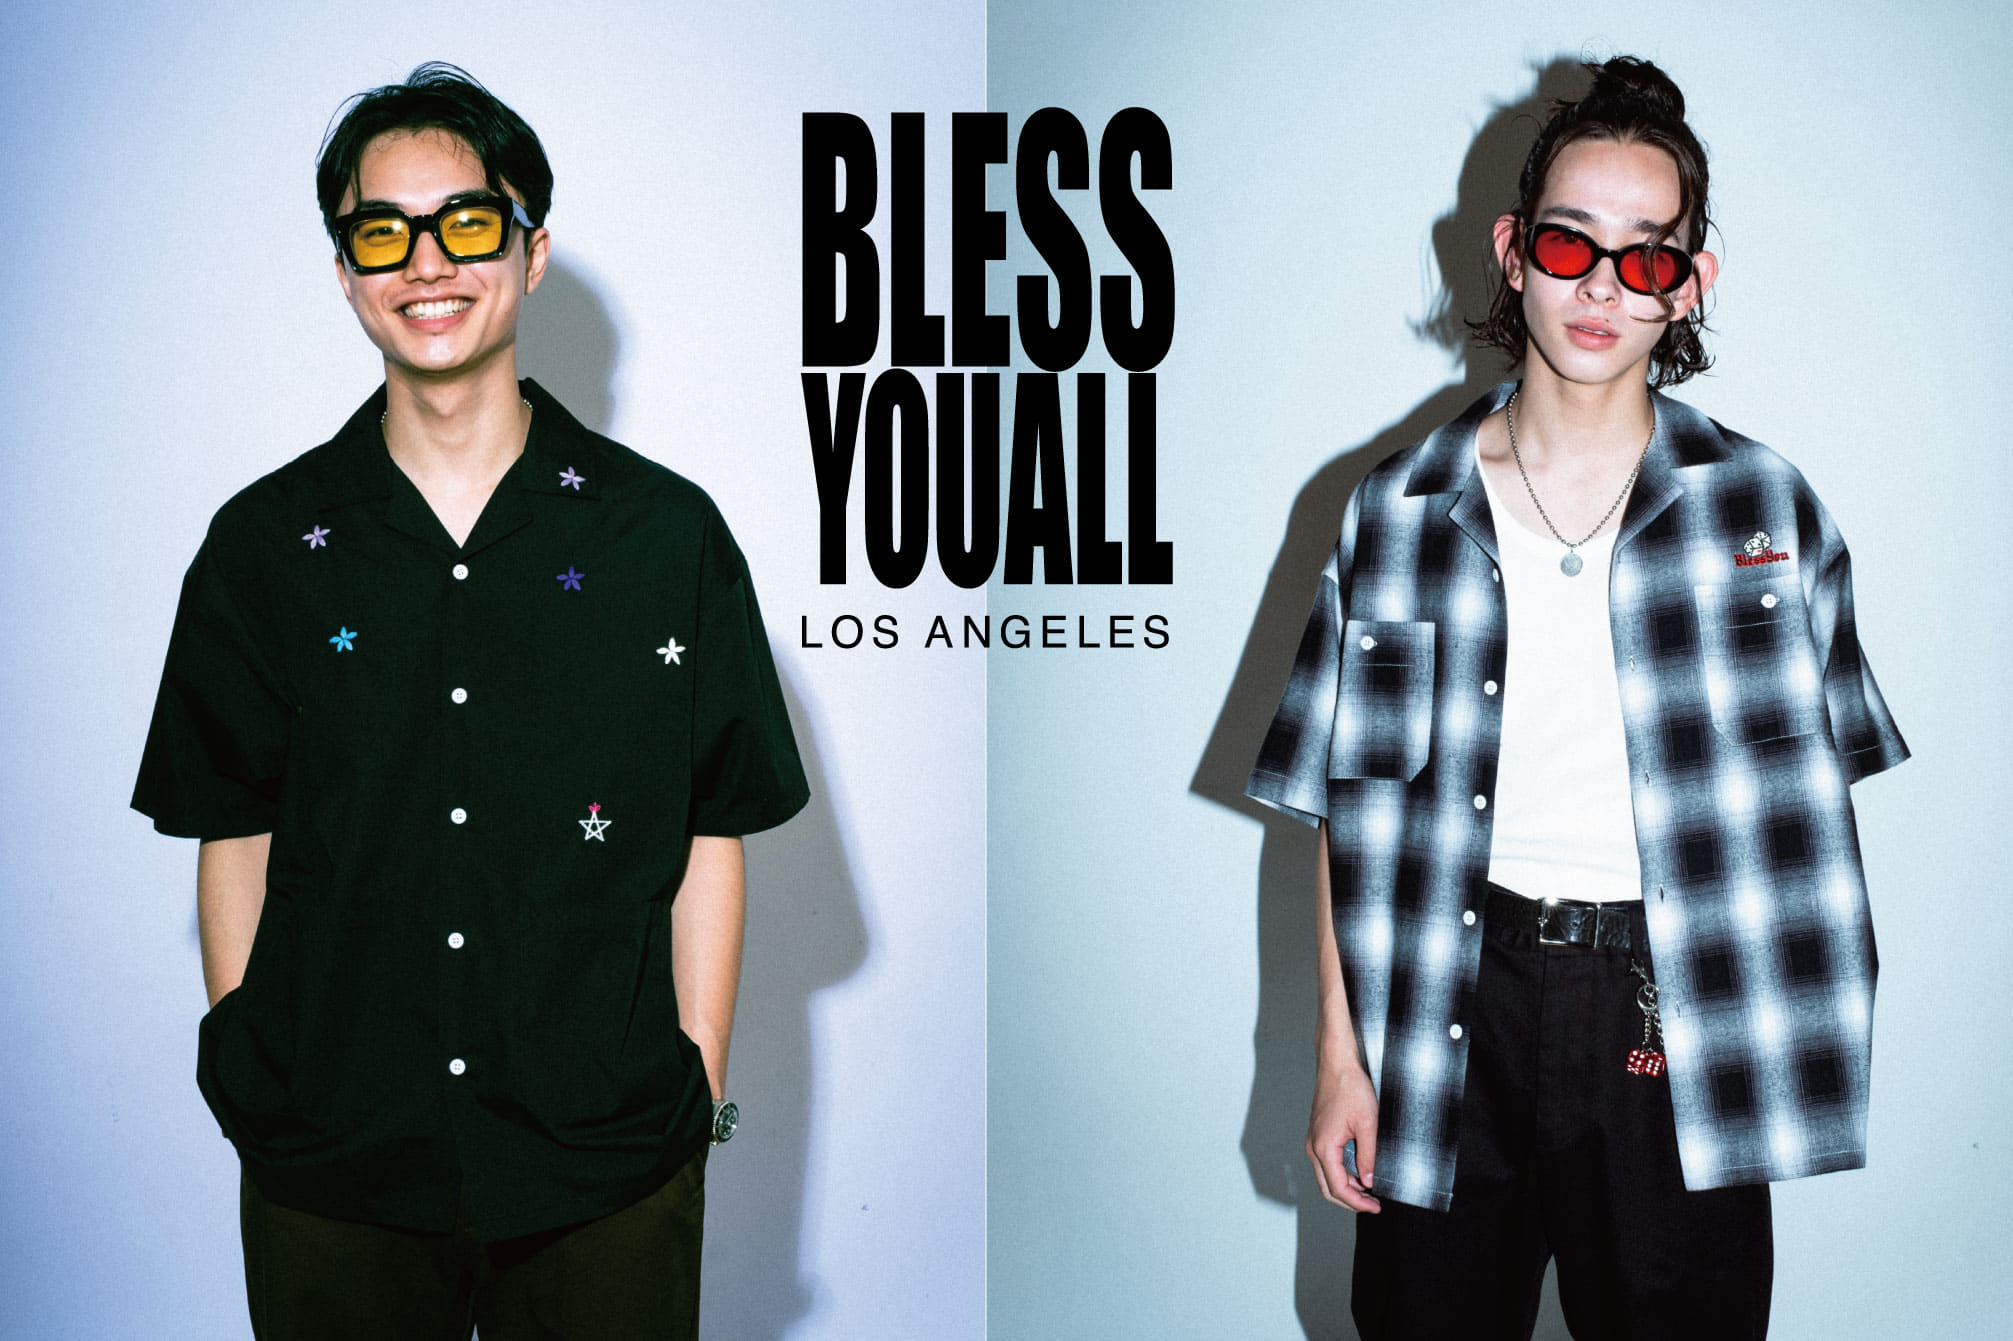 WHO’S WHO gallery 《BLESS YOU》for summer